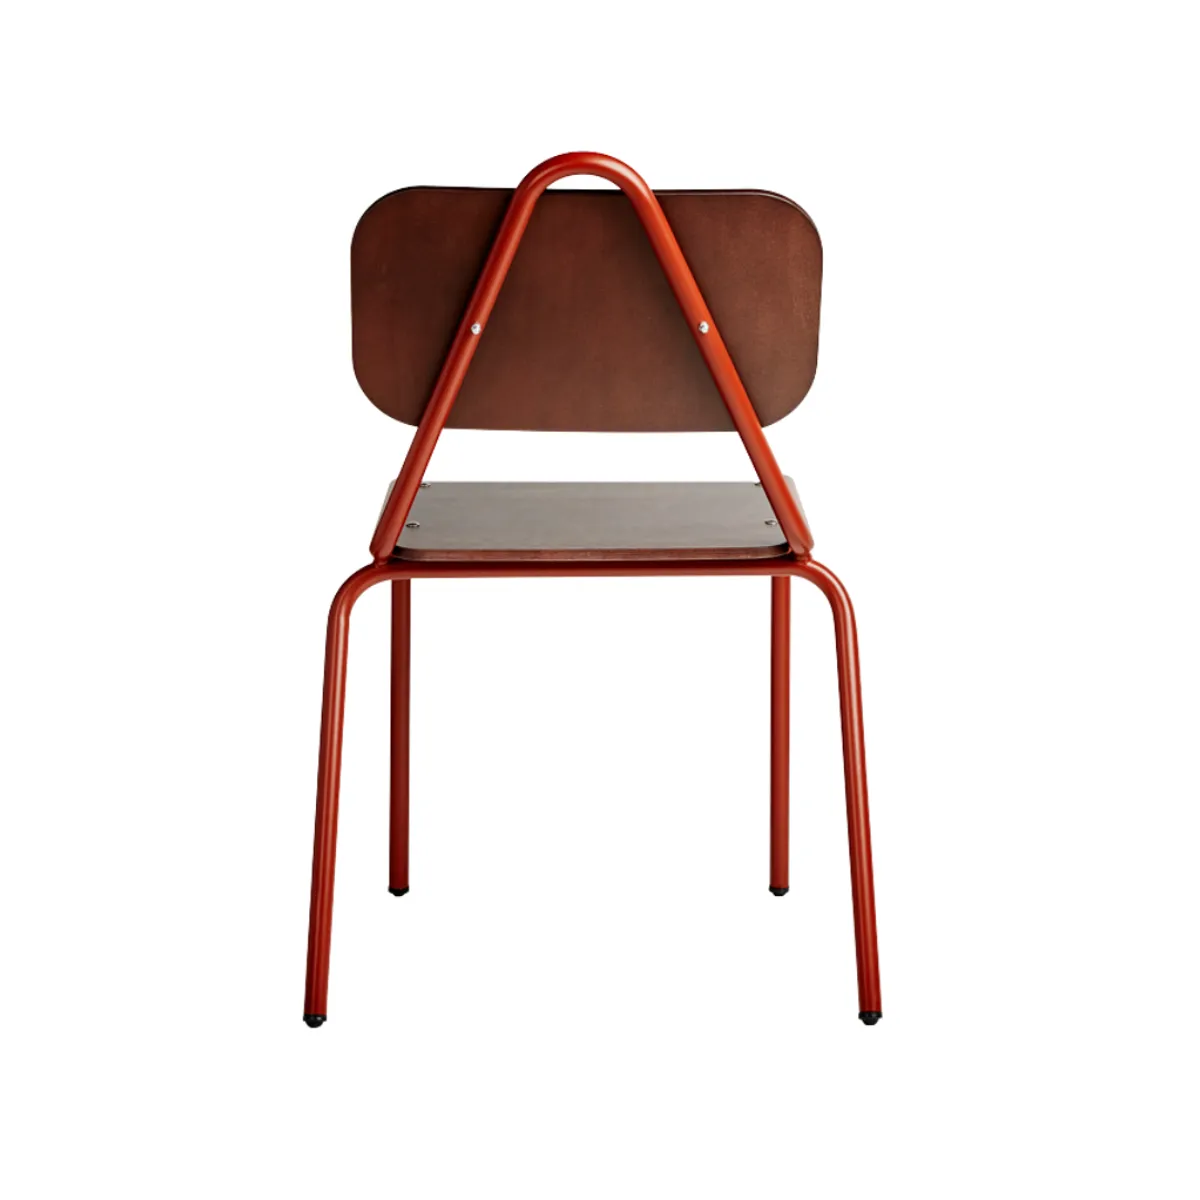 Elementary stacking chair +++